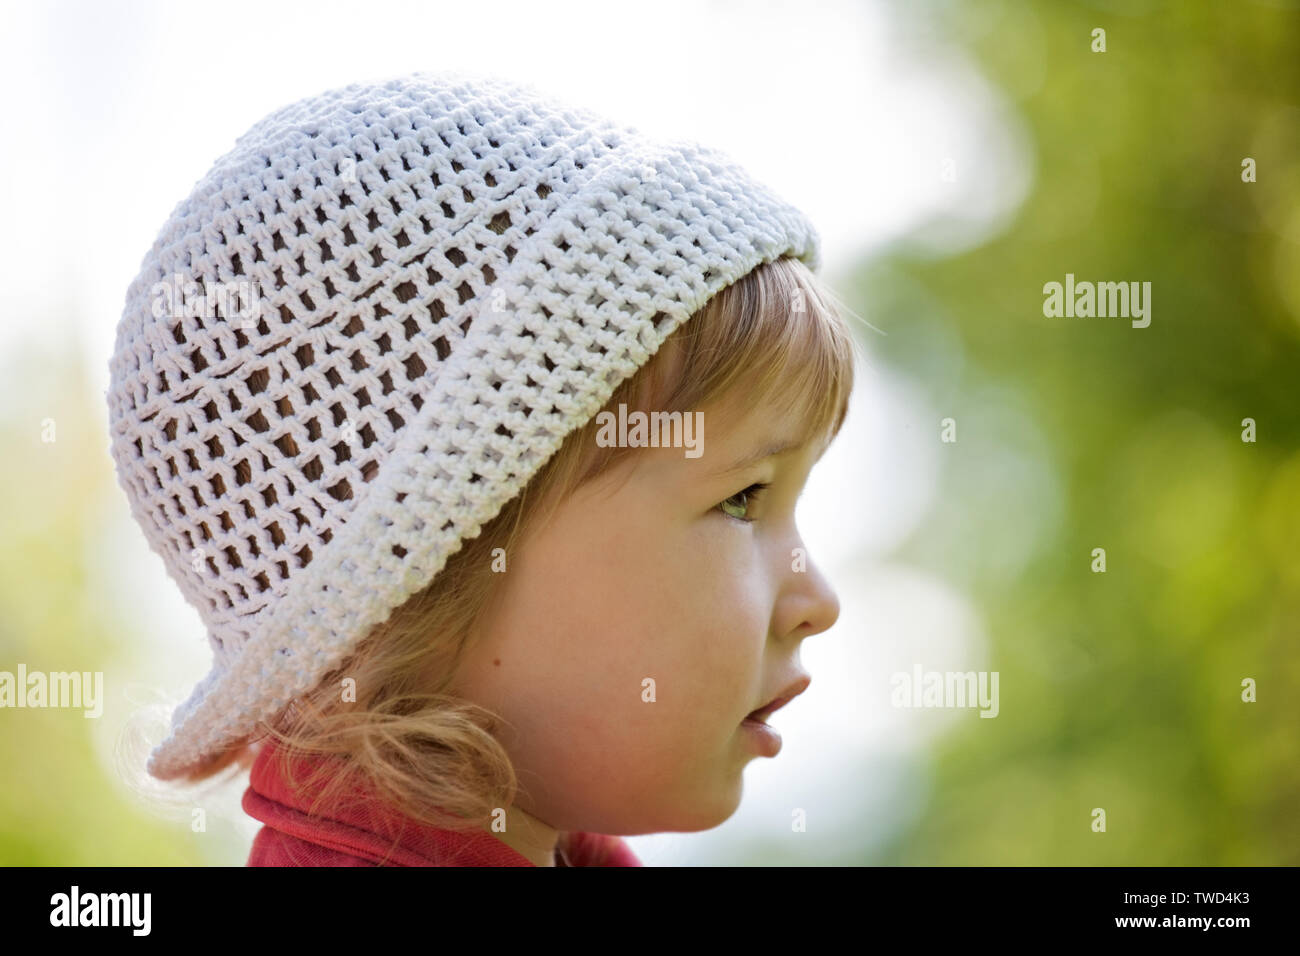 little kid pretty caucasian girl in white hat face side view closeup Stock Photo